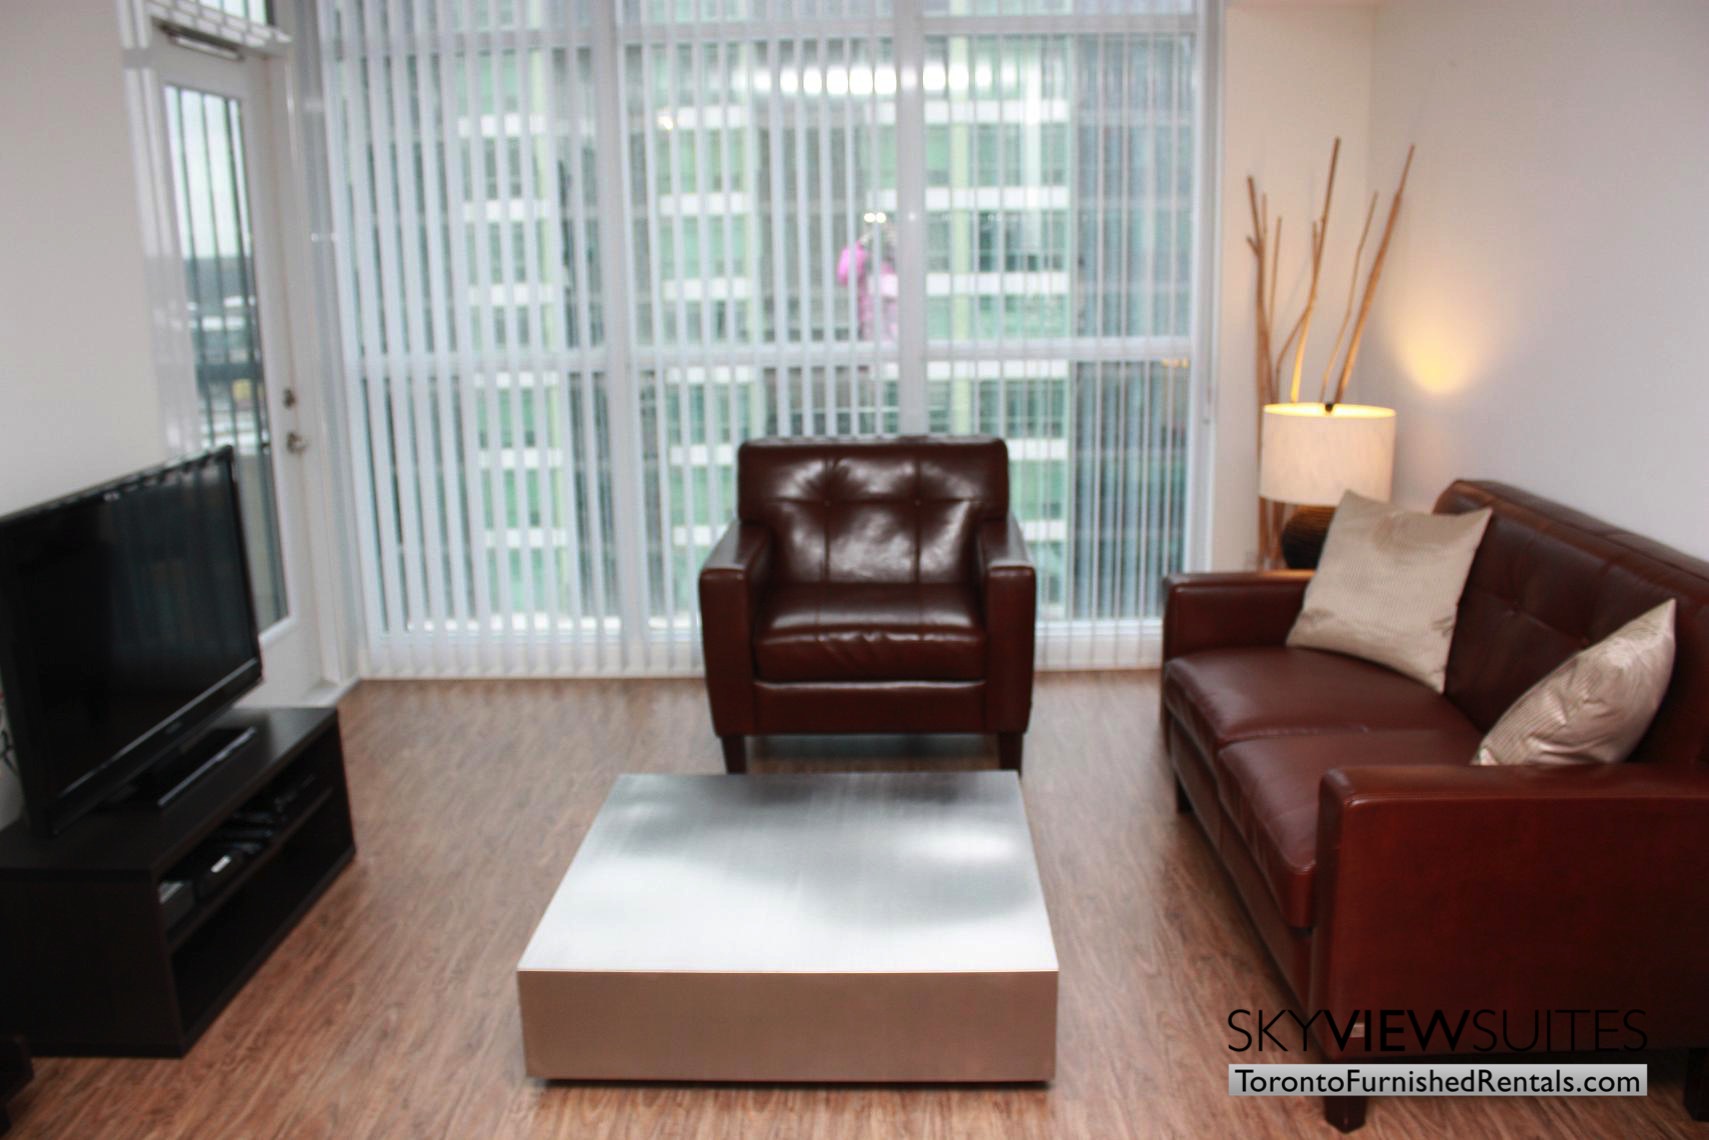 Leslie and Sheppard furnished suites toronto red leather couch